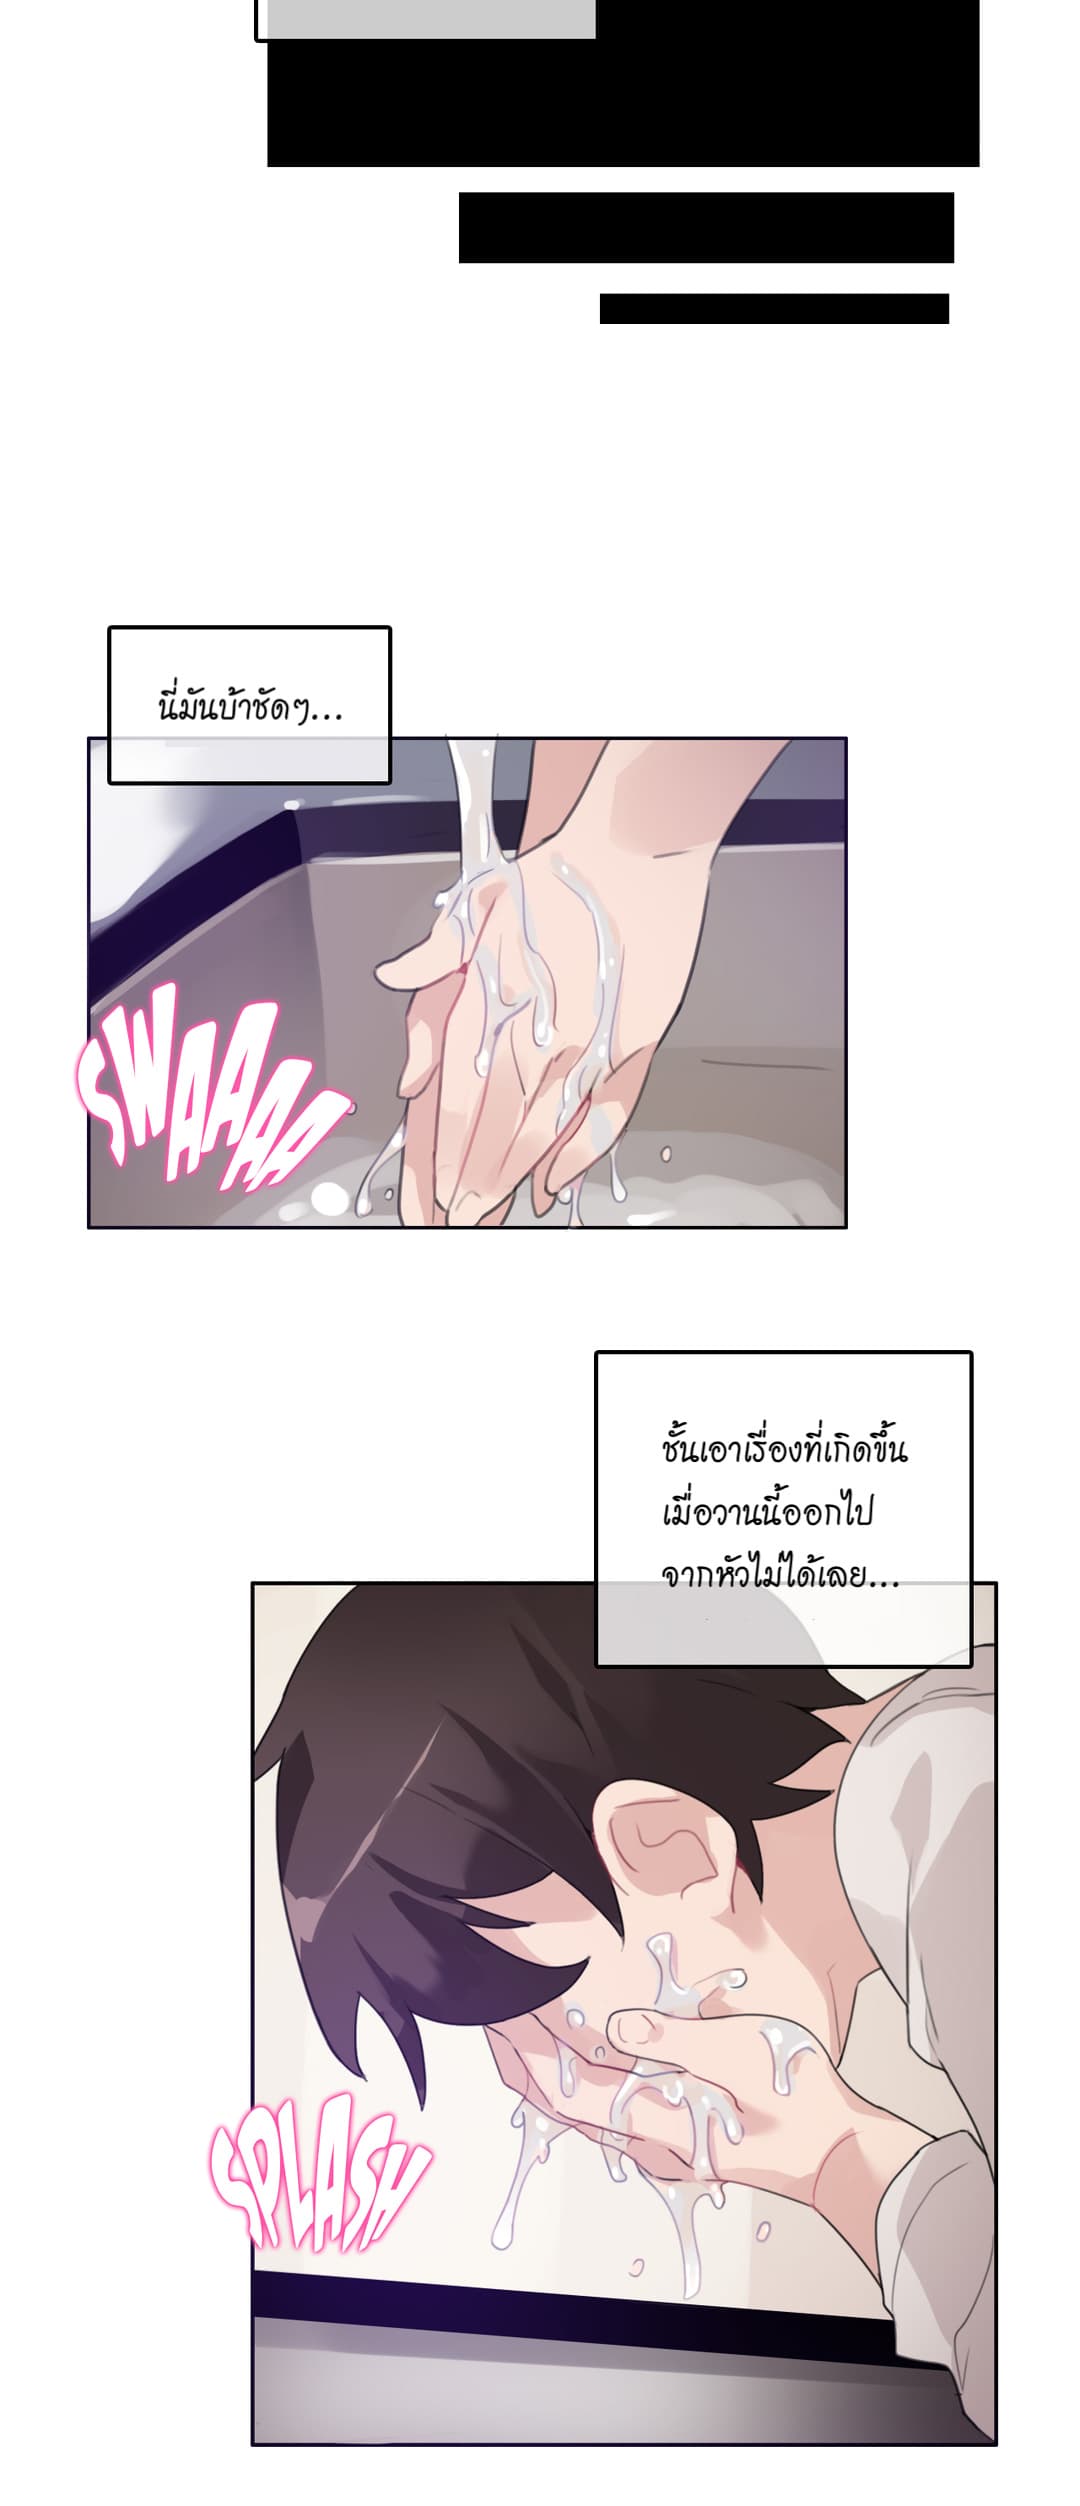 A Pervert’s Daily Life 26 (14)